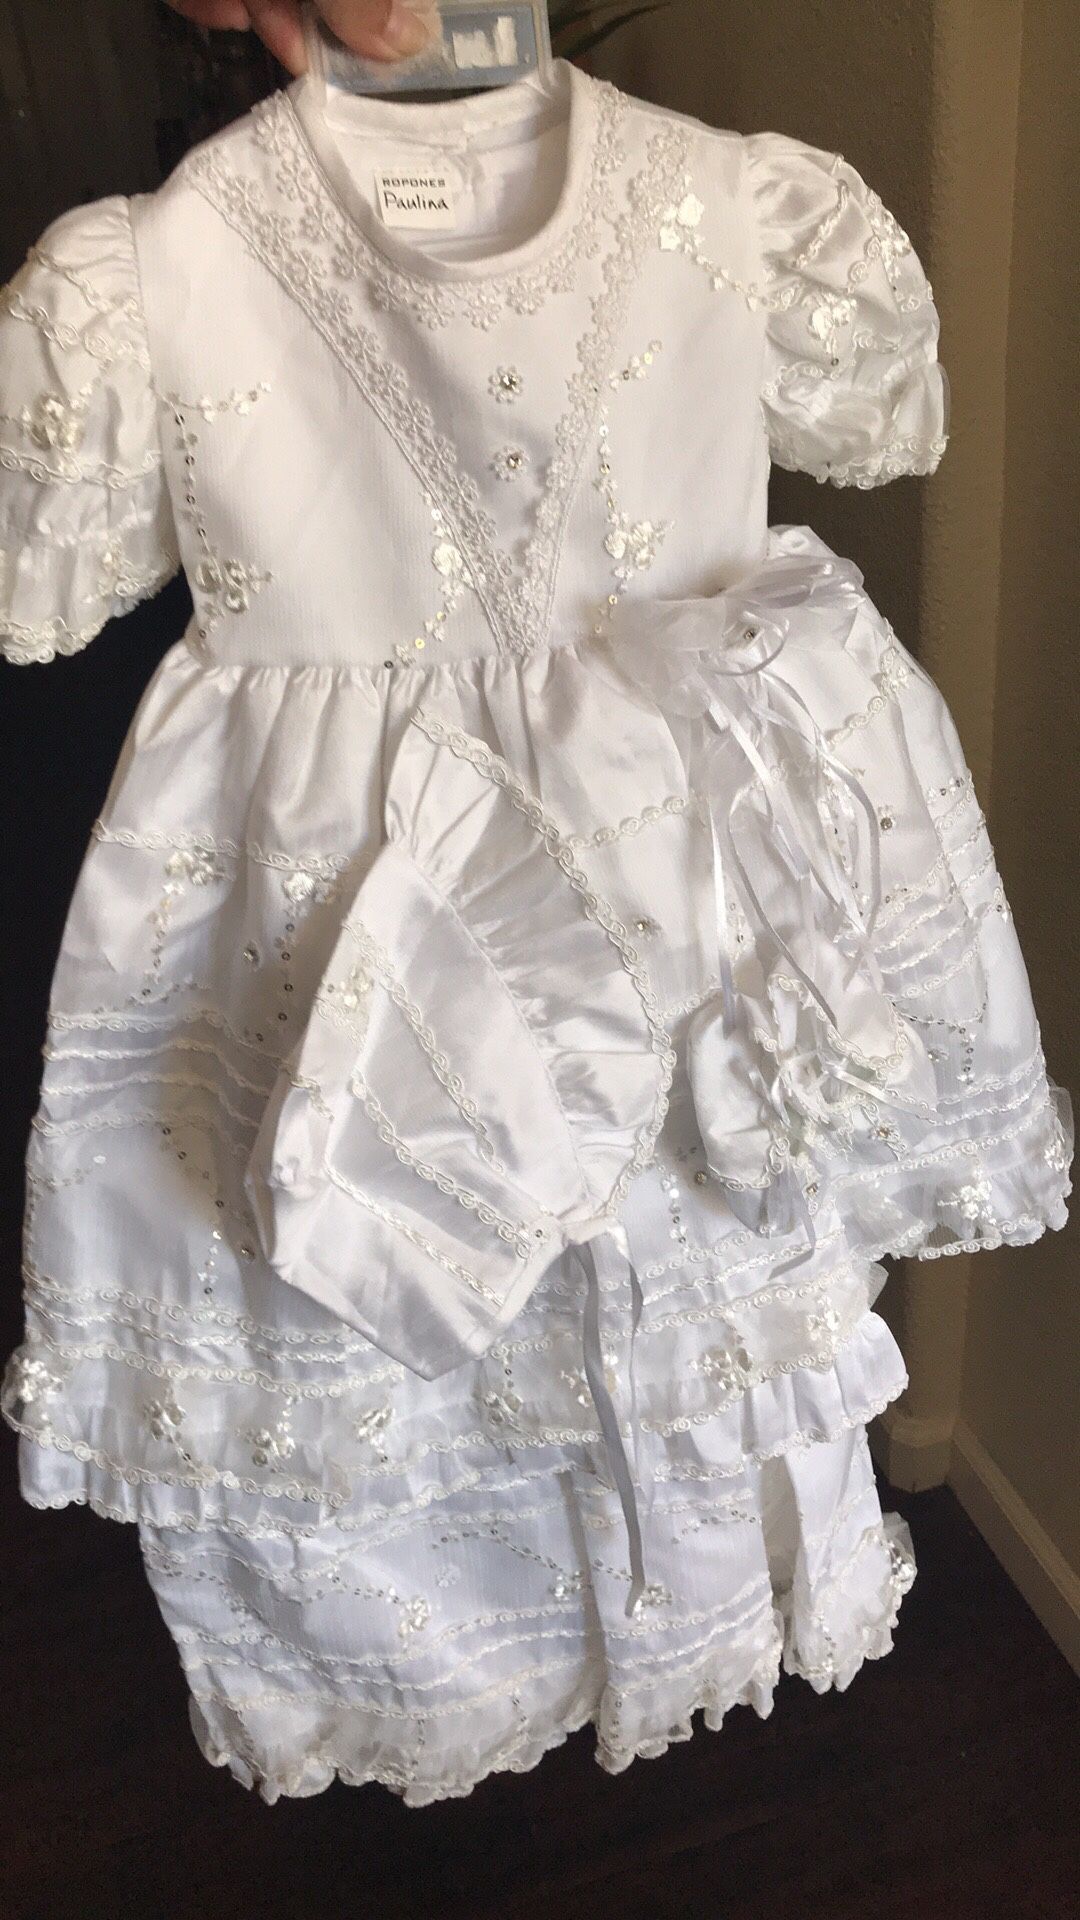 New baptism dresses one size a white one and beige